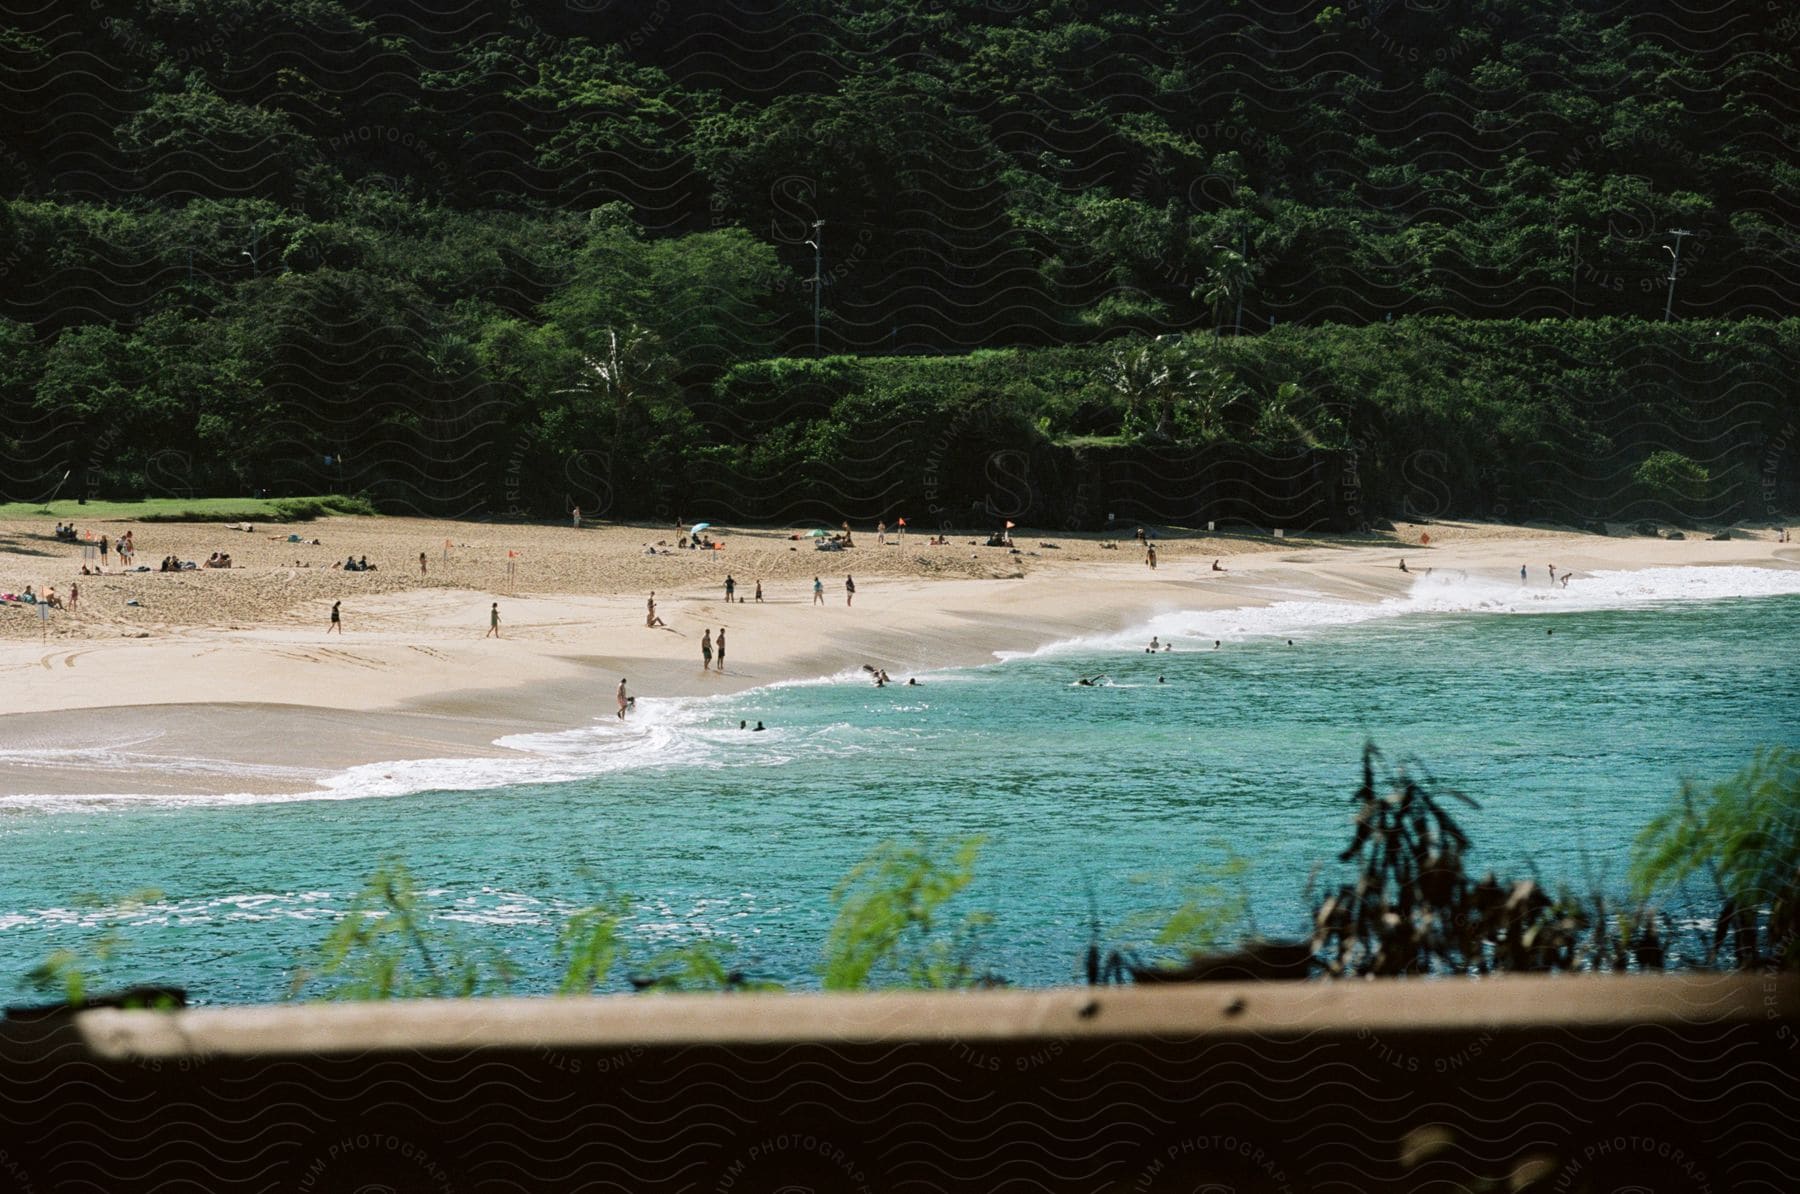 People on a beach and in the water outside of a tropical rainforest